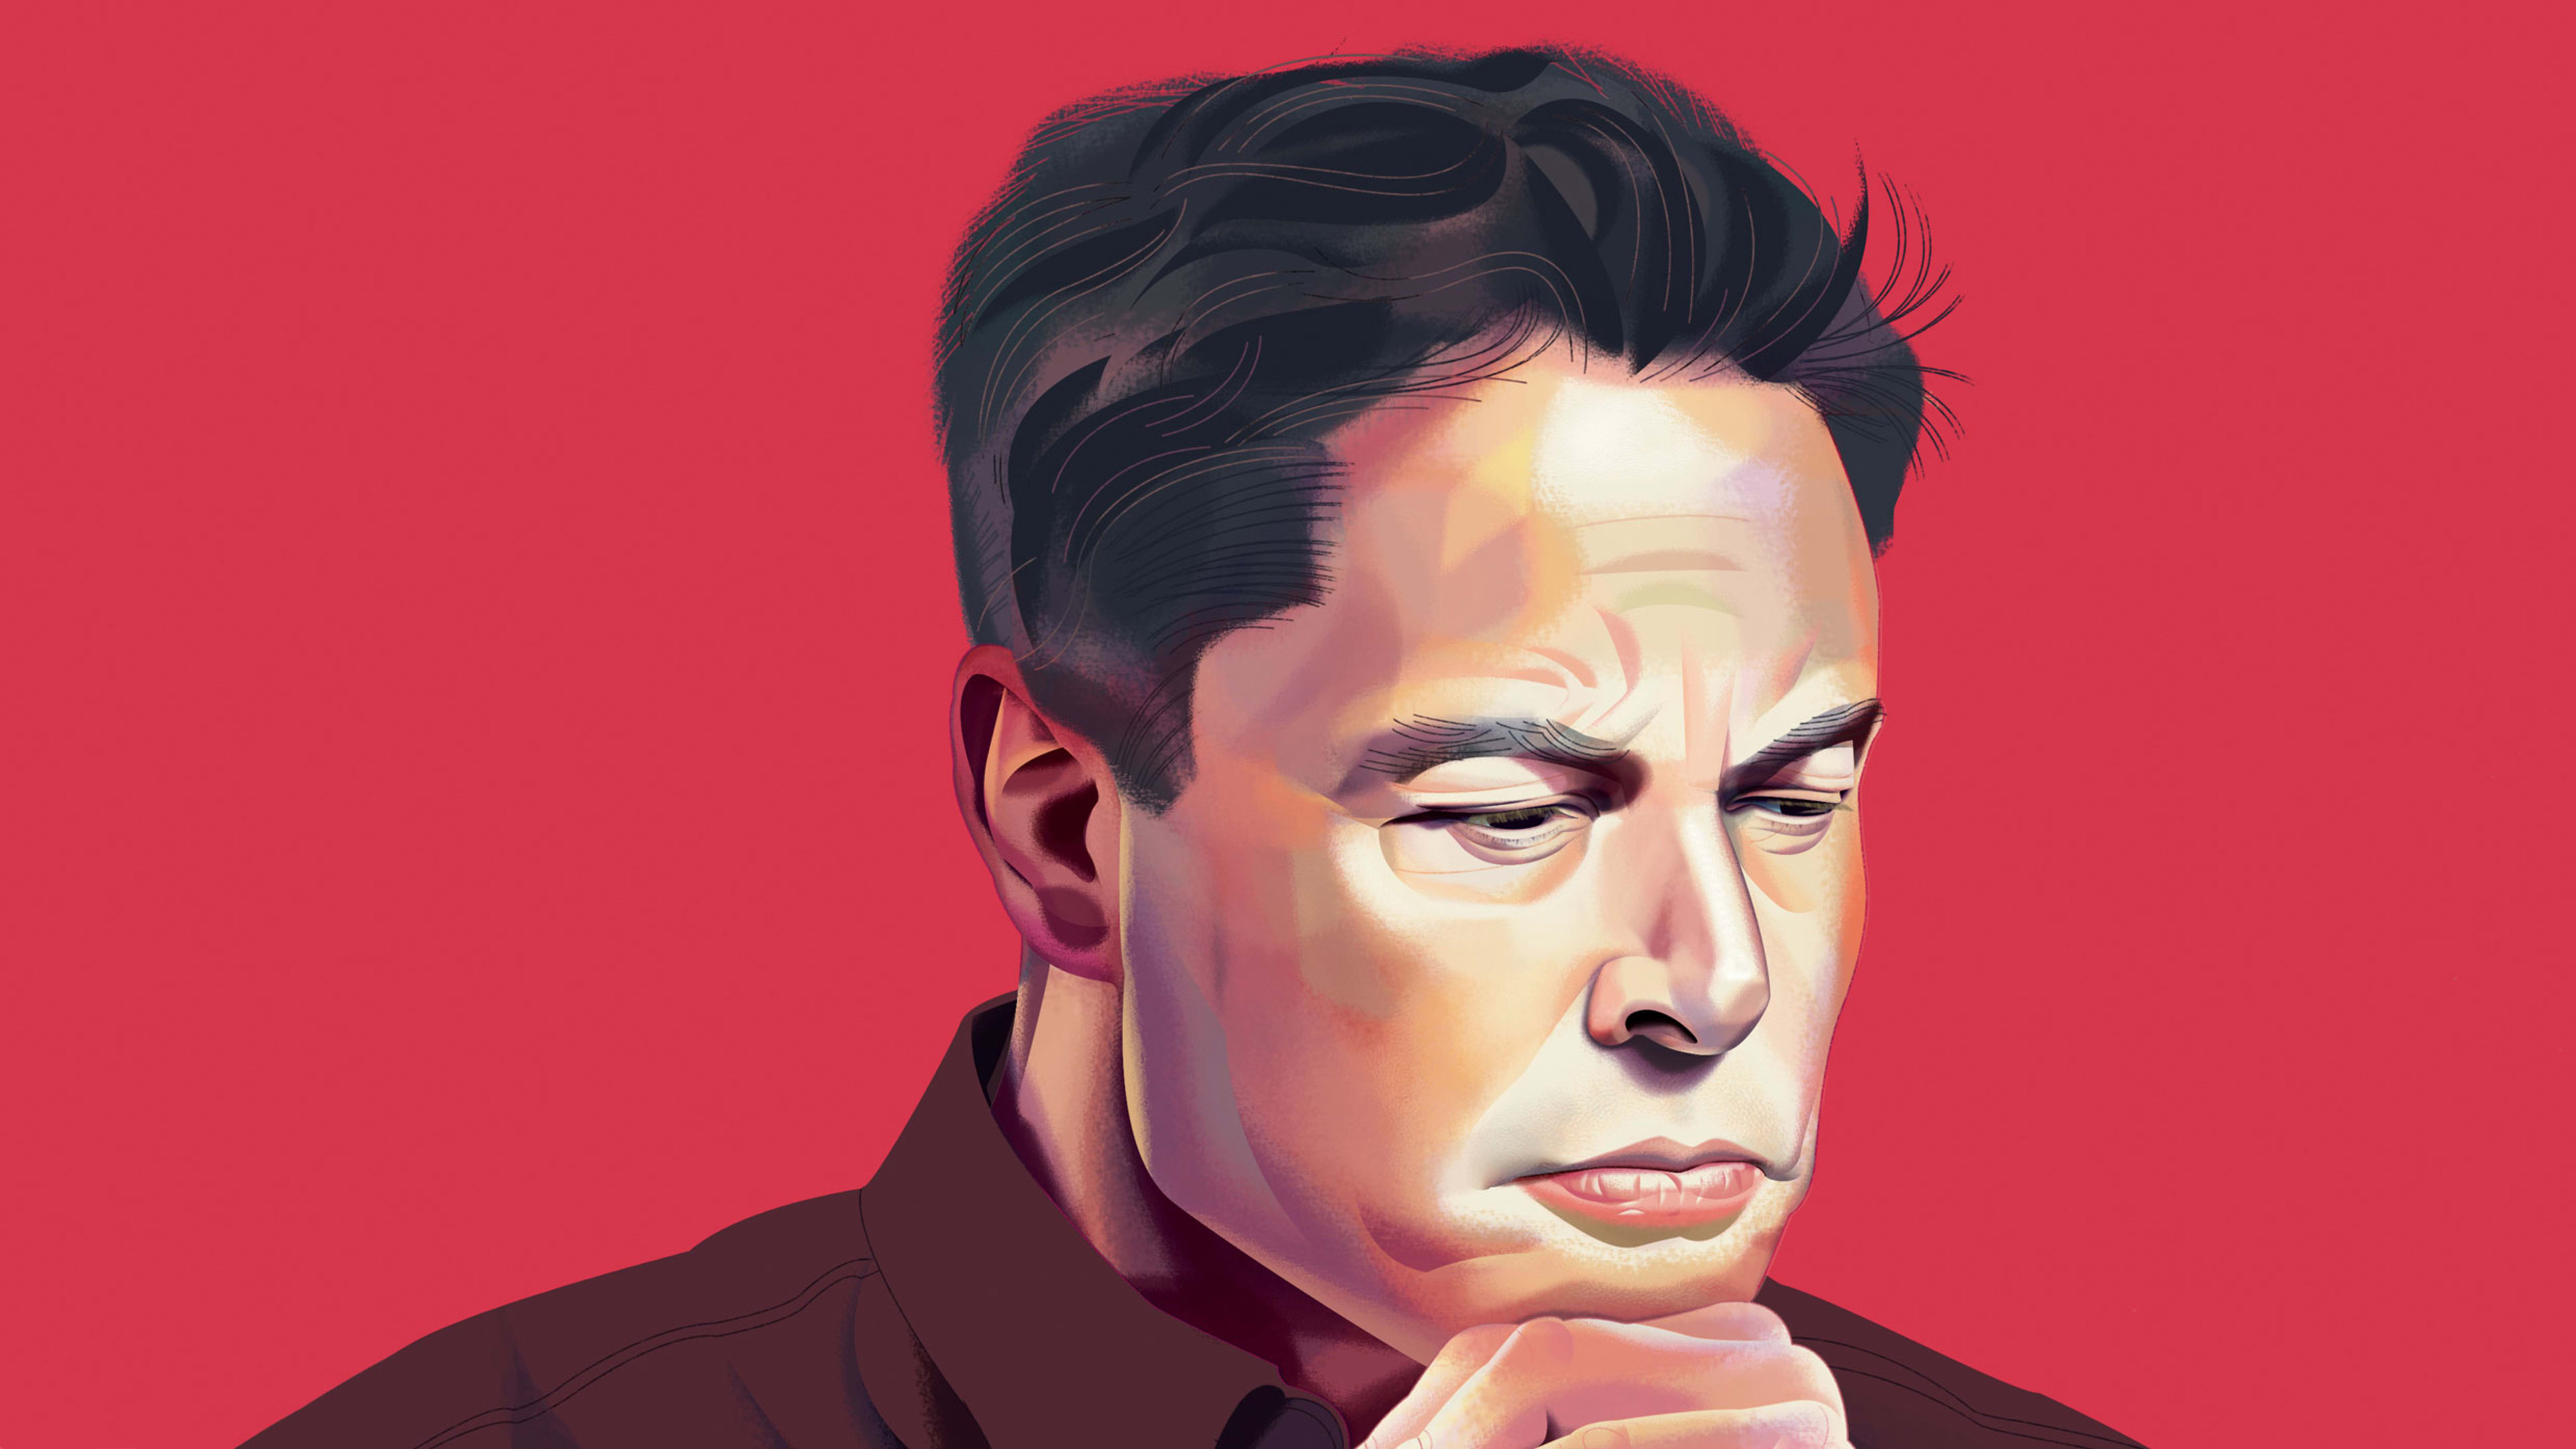 Elon Musk and Tesla are impossible to root for, but we’re doing it anyway